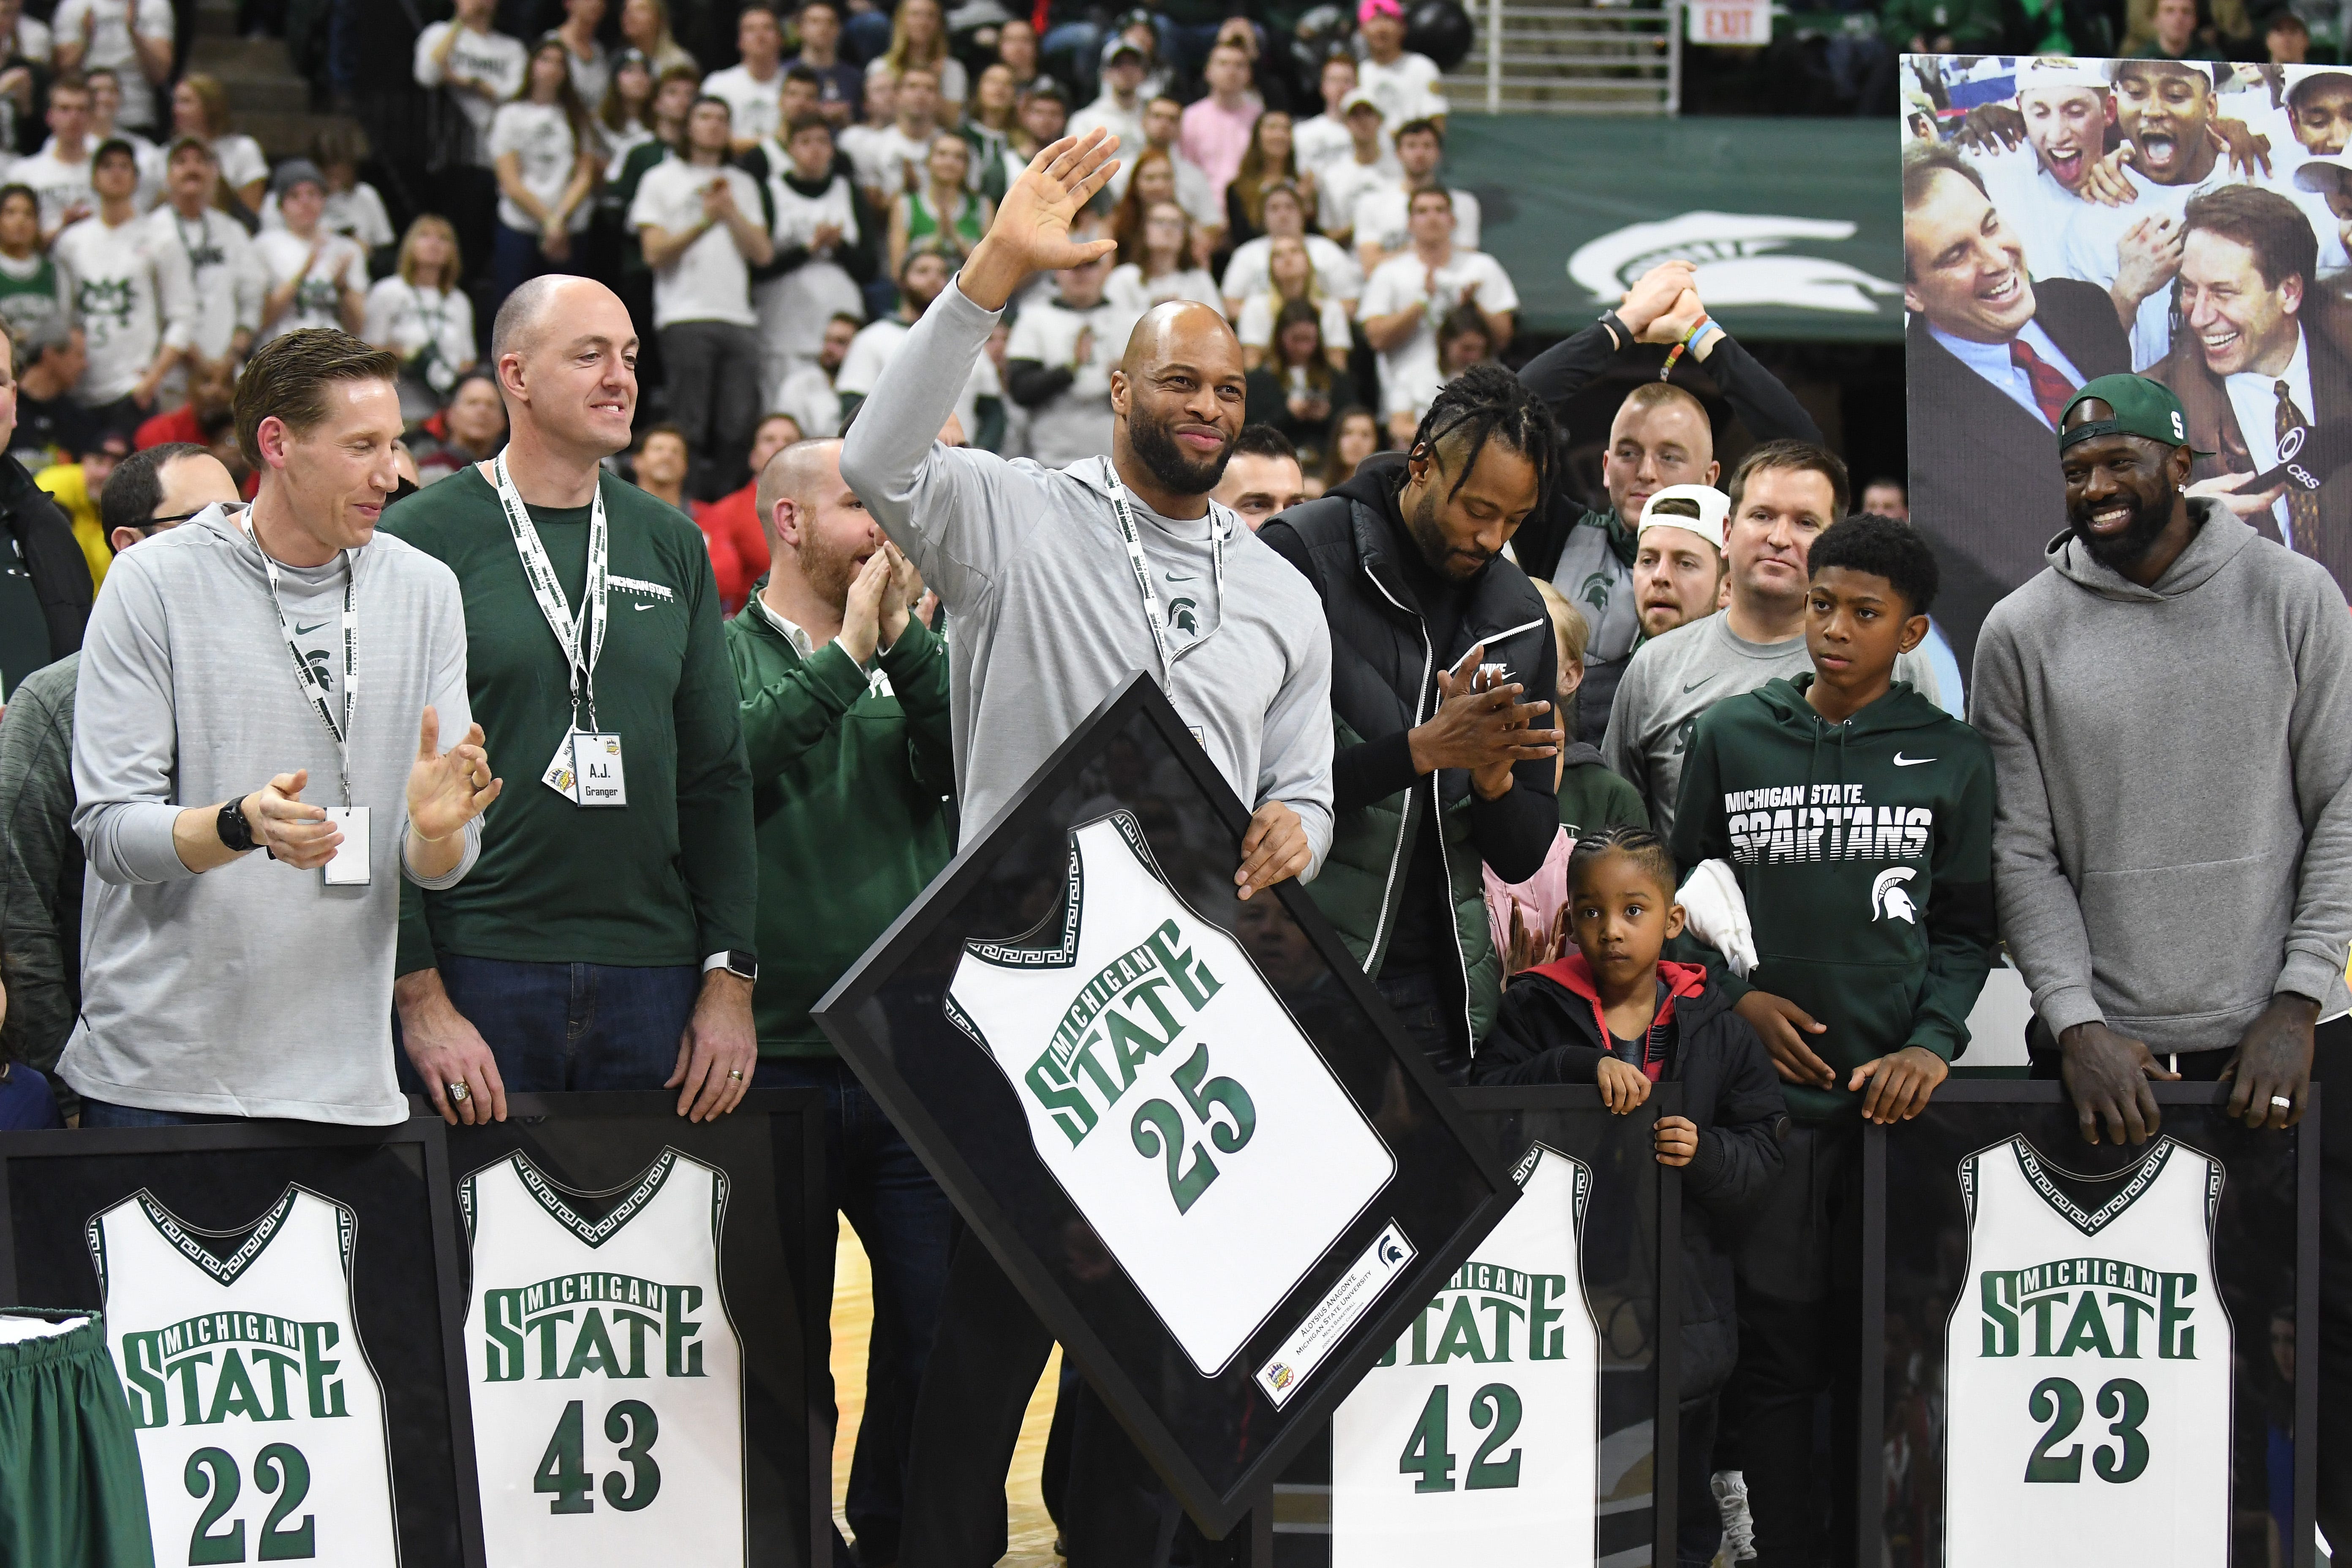 Michigan State ' s 2000 championship team member Aloyisus Anagonye is introduced, standing next to Steve Cherry, A. J. Granger, Morris Peterson and Jason Richardson, during a halftime ceremony this past season.